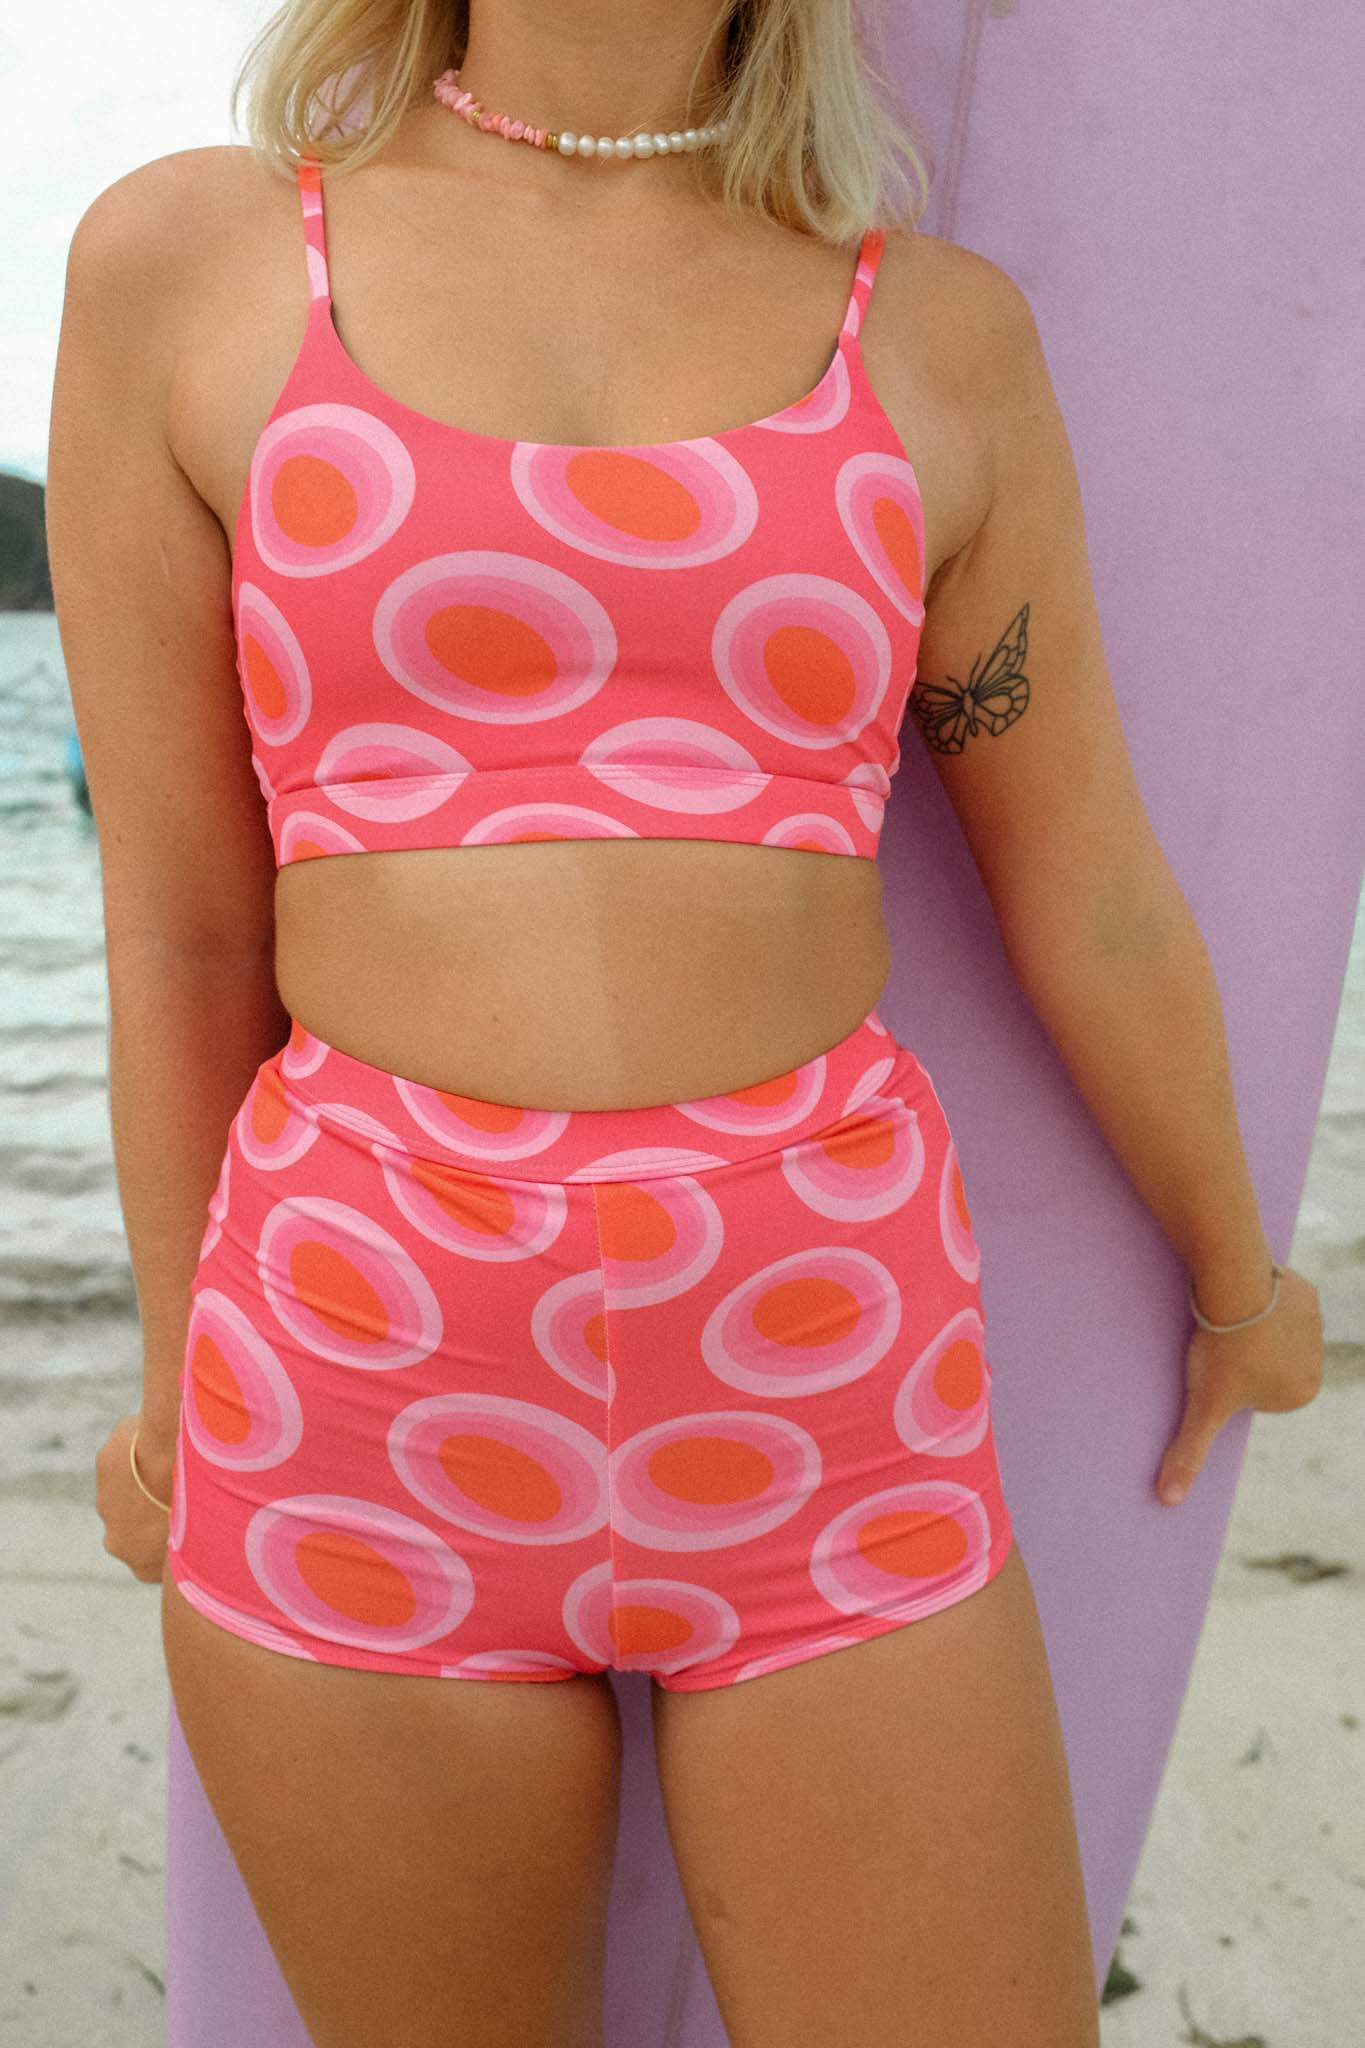 surfer posing at the beach wearing the surf bikini with watermelon print